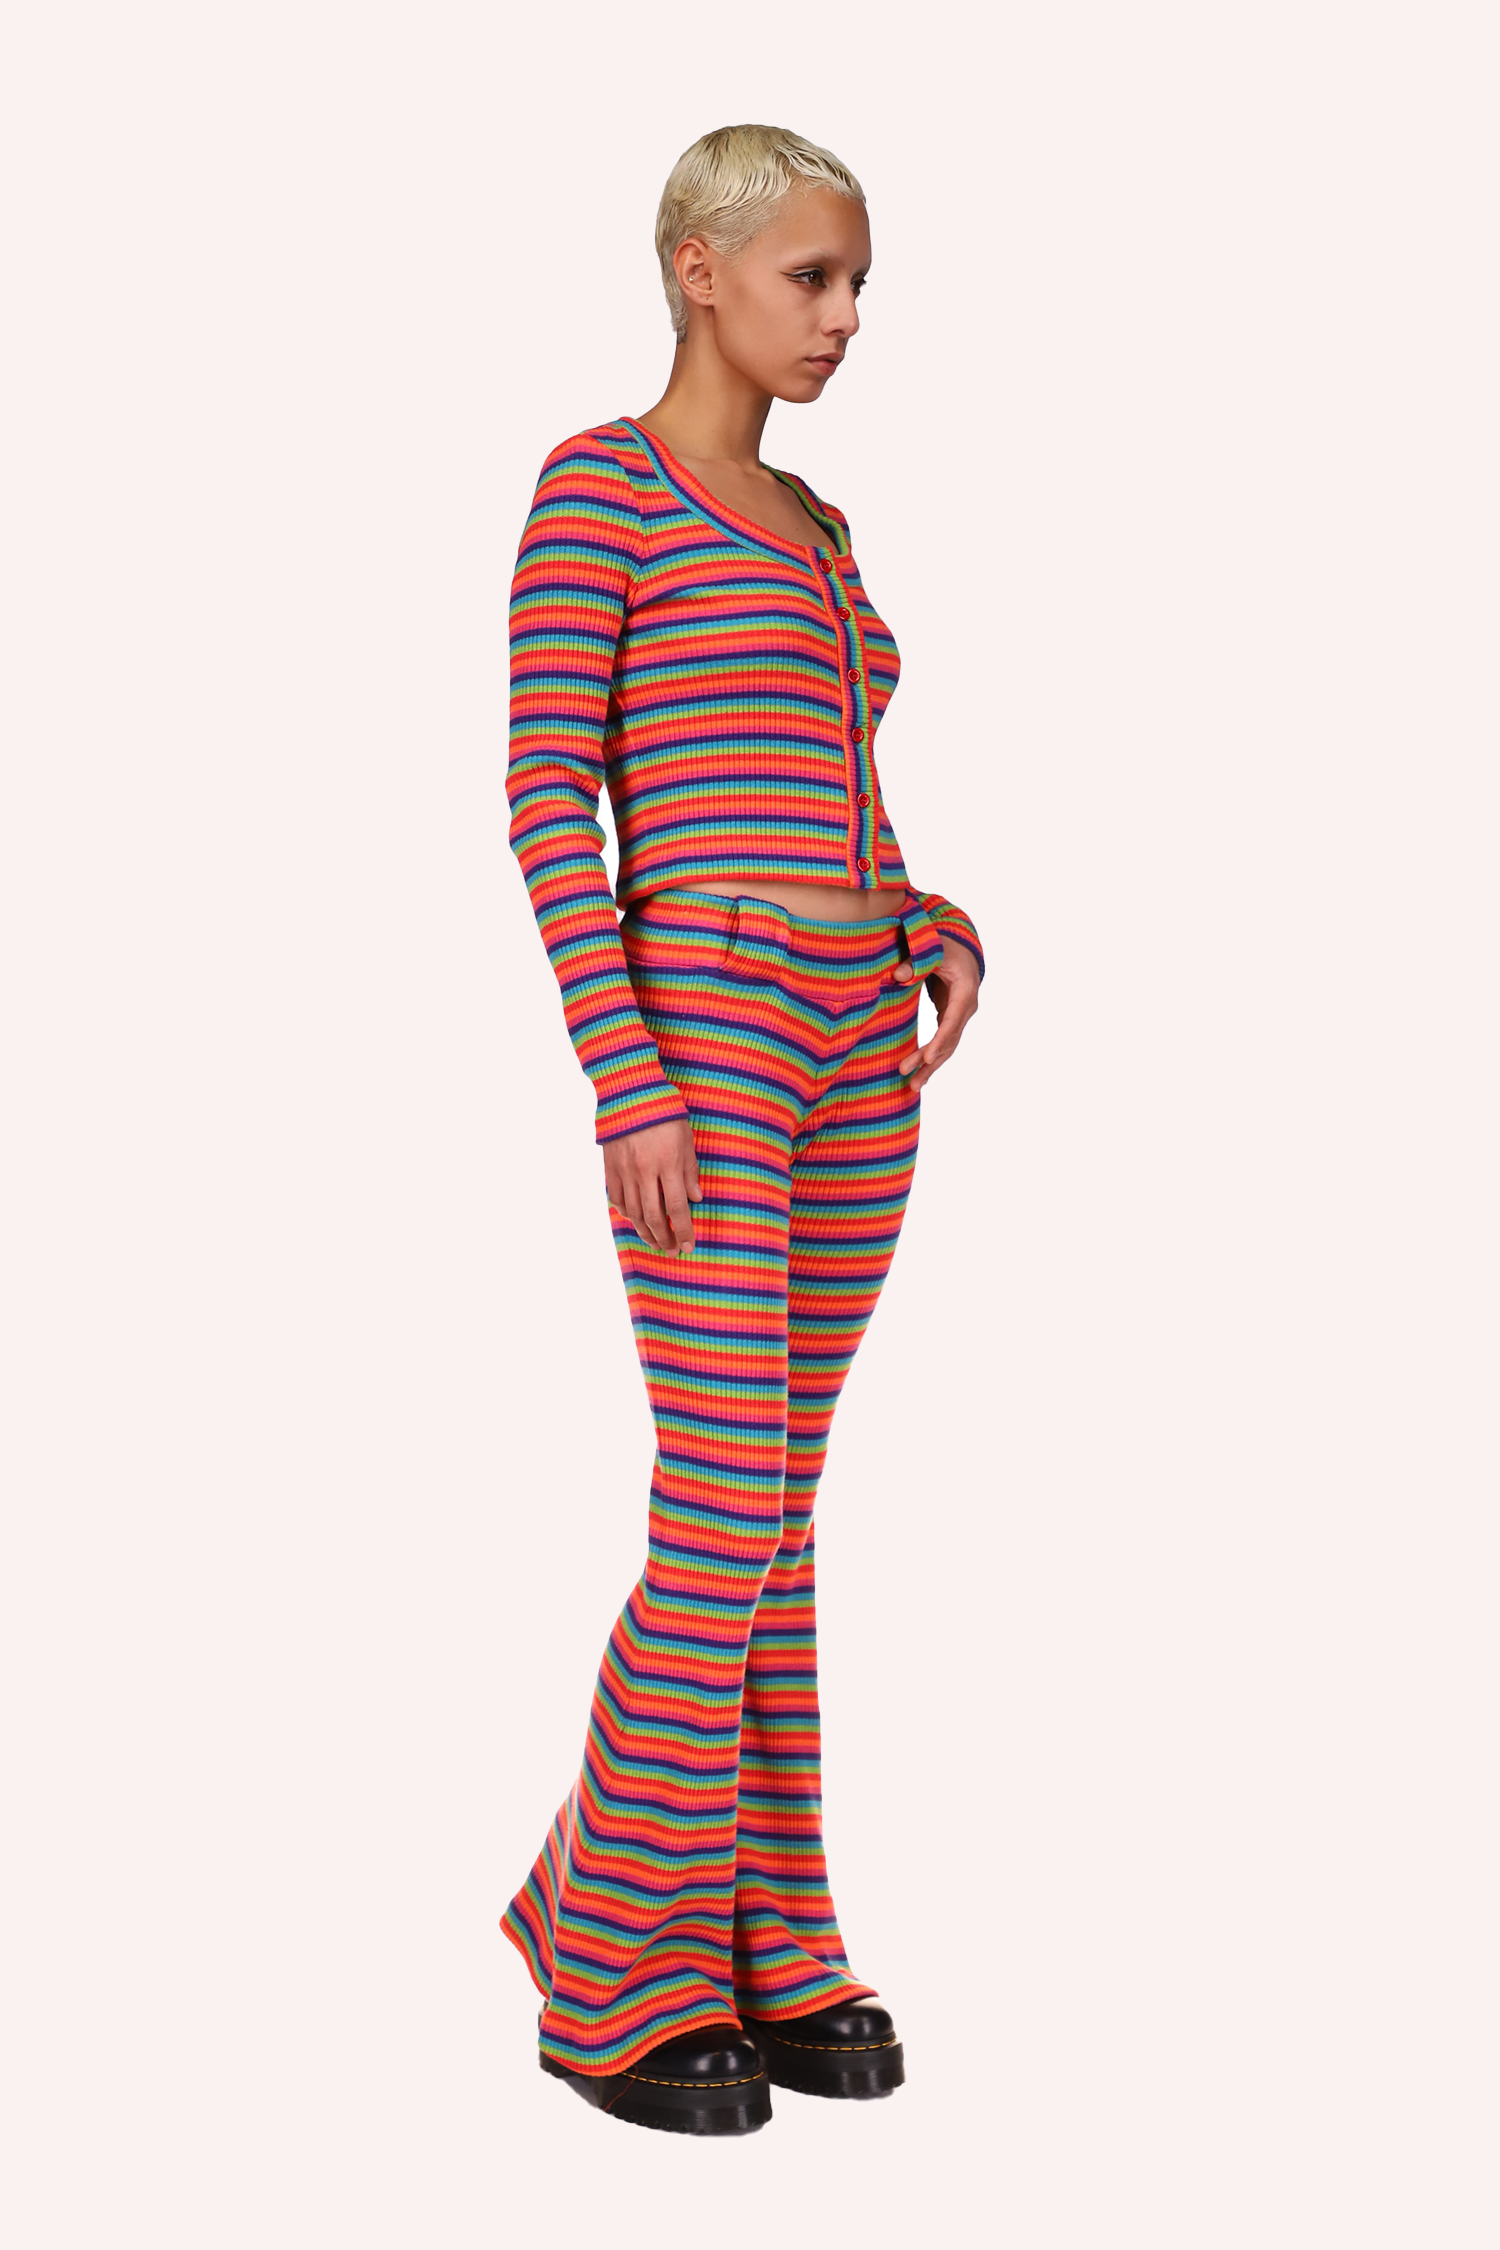 Rainbow Stripe Pants long and slim pants, very wide at the bottom over the shoes, with 4 wide loops for a belt